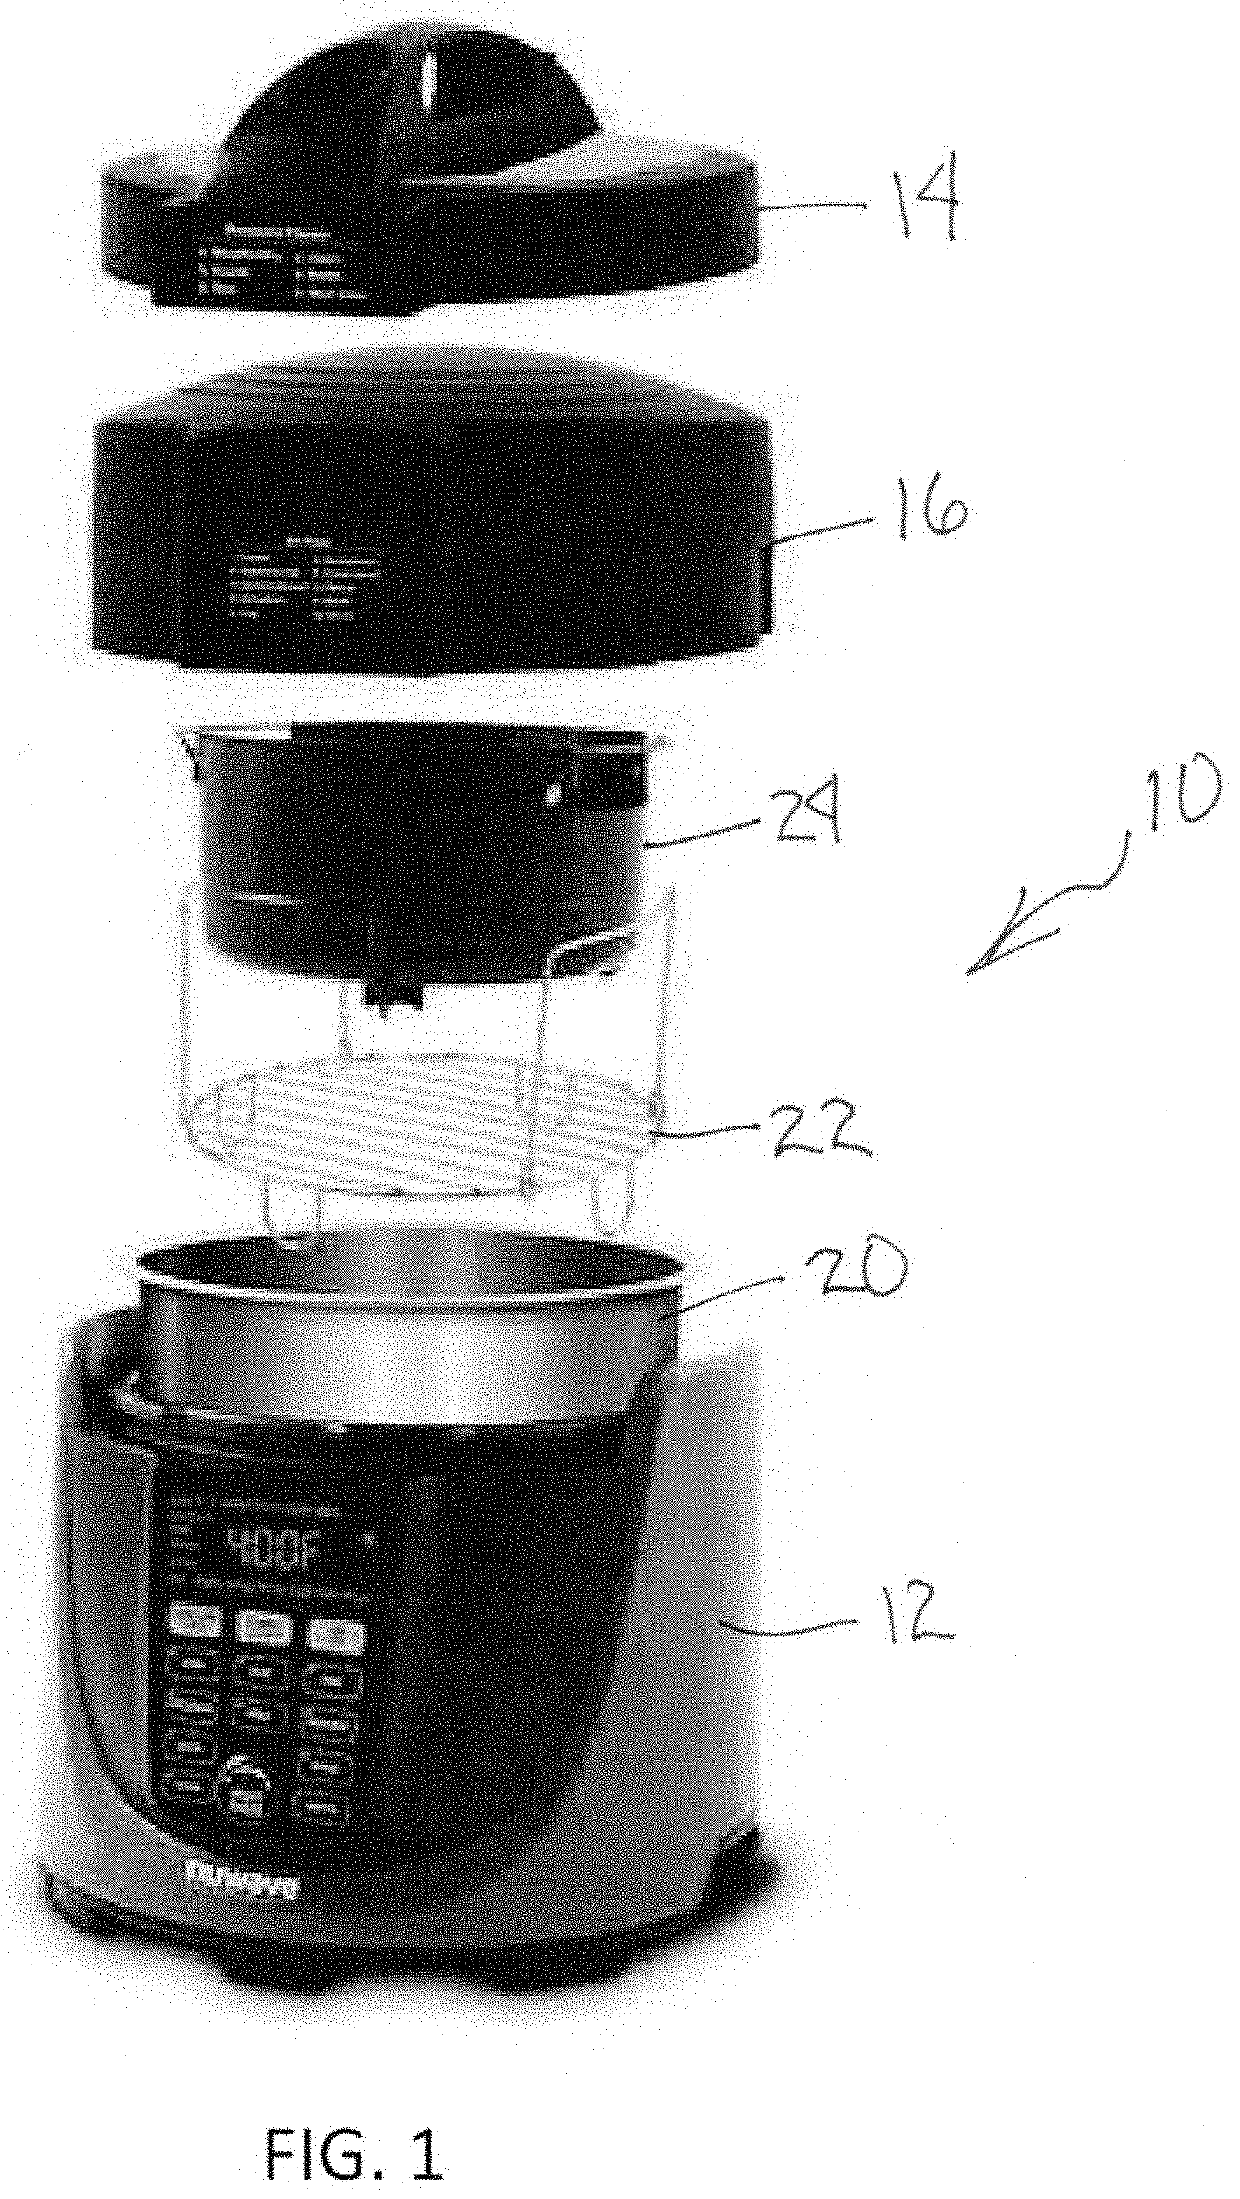 Pressure Cooker and Air Fryer Appliance